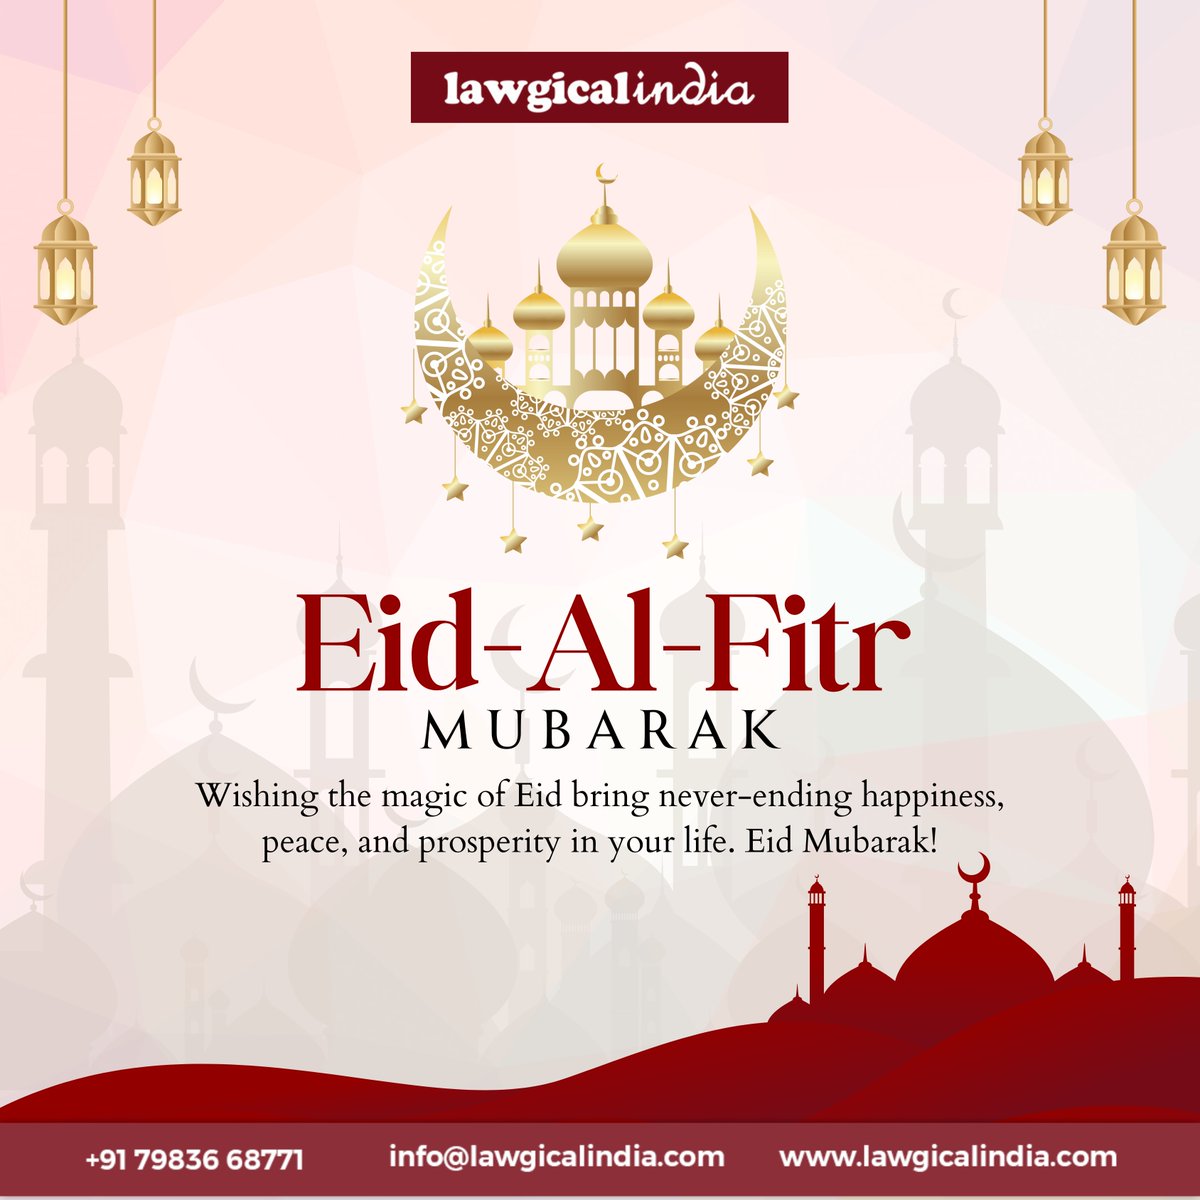 May this Eid bring new opportunities for growth, prosperity, and success to your business. Eid Mubarak!

#lawgicalindia #legalservices #onlinebusiness #onlinebusinesstips #businessmanagement #websitedesign #startonlinebusiness #businessconsulting #EidMubarak #Eid #EidAlFitr